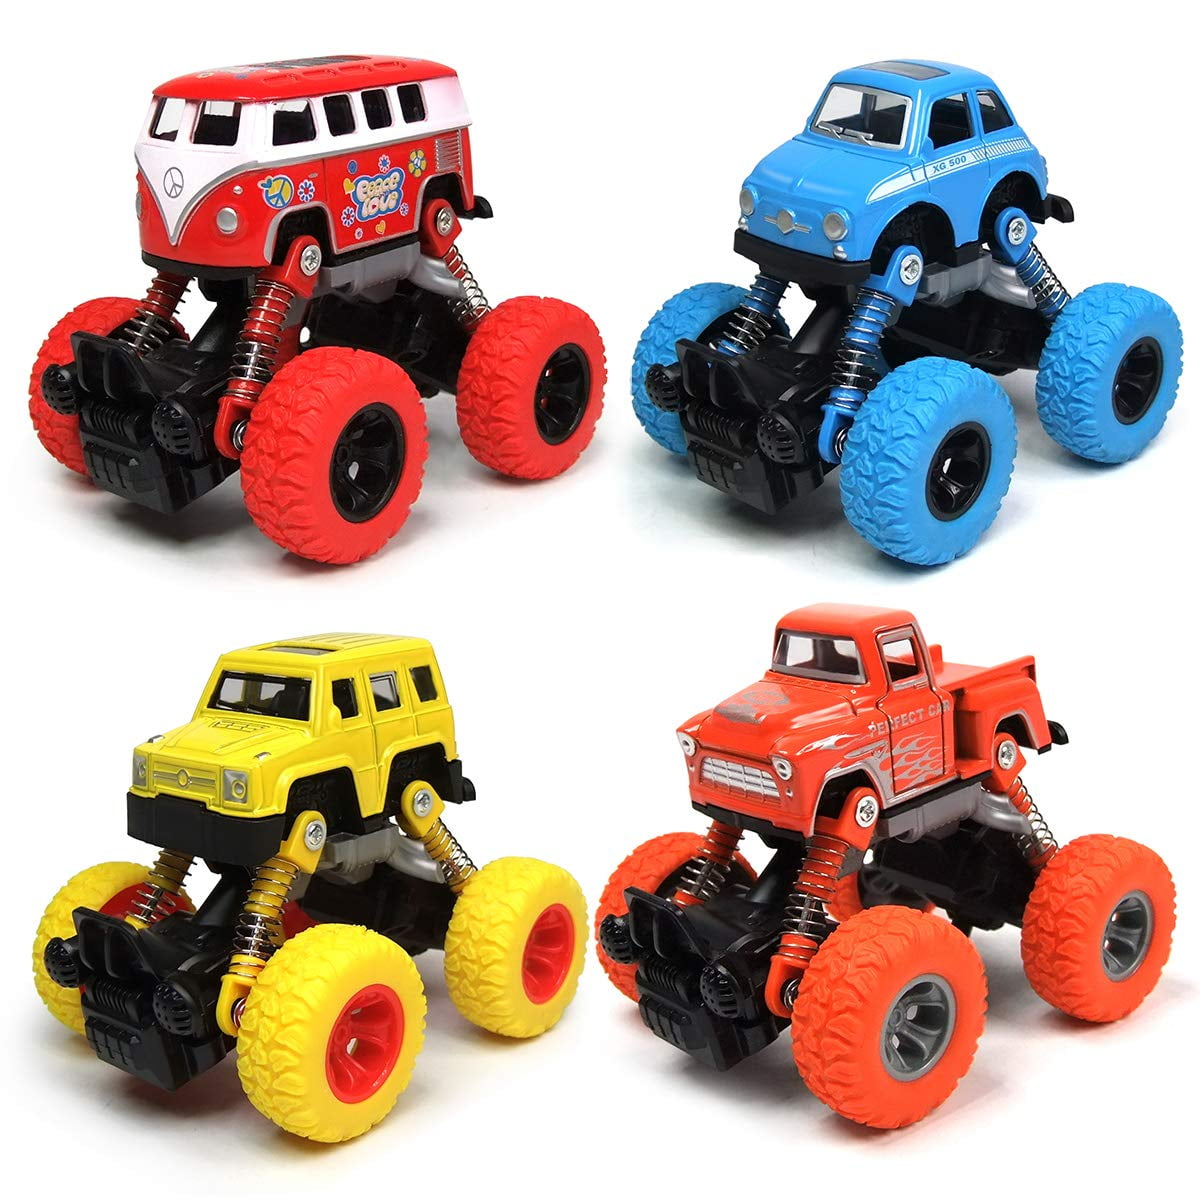 Alloy Push Car for Toddlers 4 Wheels Drive Push and Go Truck Birthday Gift for 3 4 5 6 7 8 9 Year Old Boys Kids Girls Friction Powered Cars Toys for Kids 360 Degree Rotation 4 Pack Toy Cars 